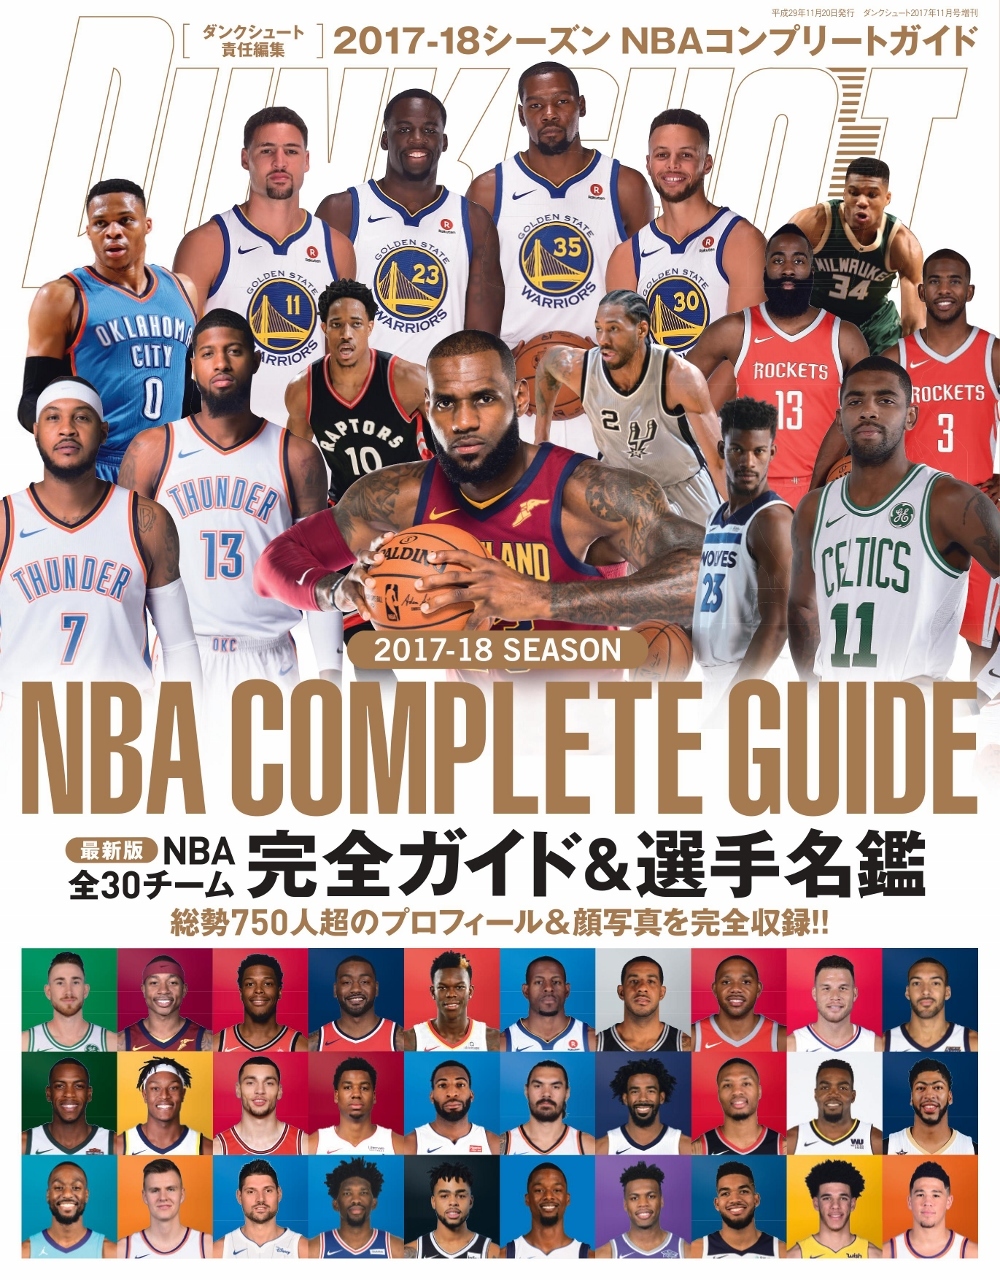 2017-2018NBA COMPLETE GUIDE | 日本スポーツ企画